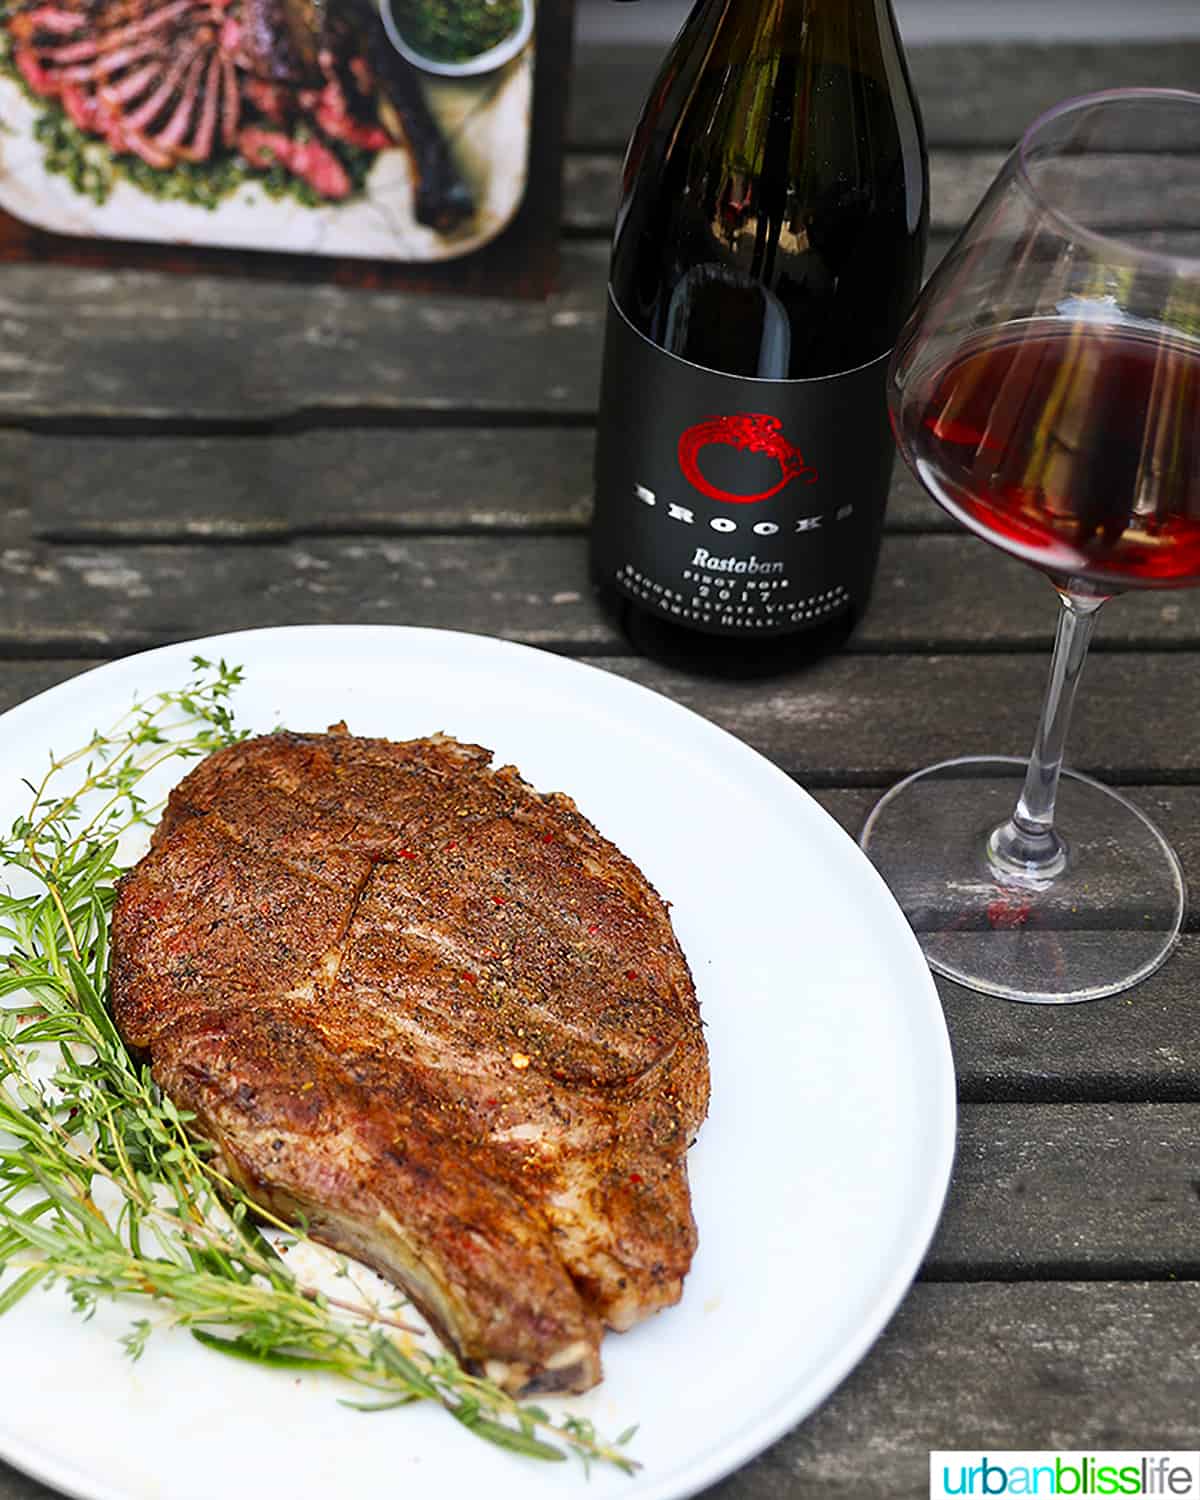 glass and bottle of red wine next to a plate of steak and herbs.